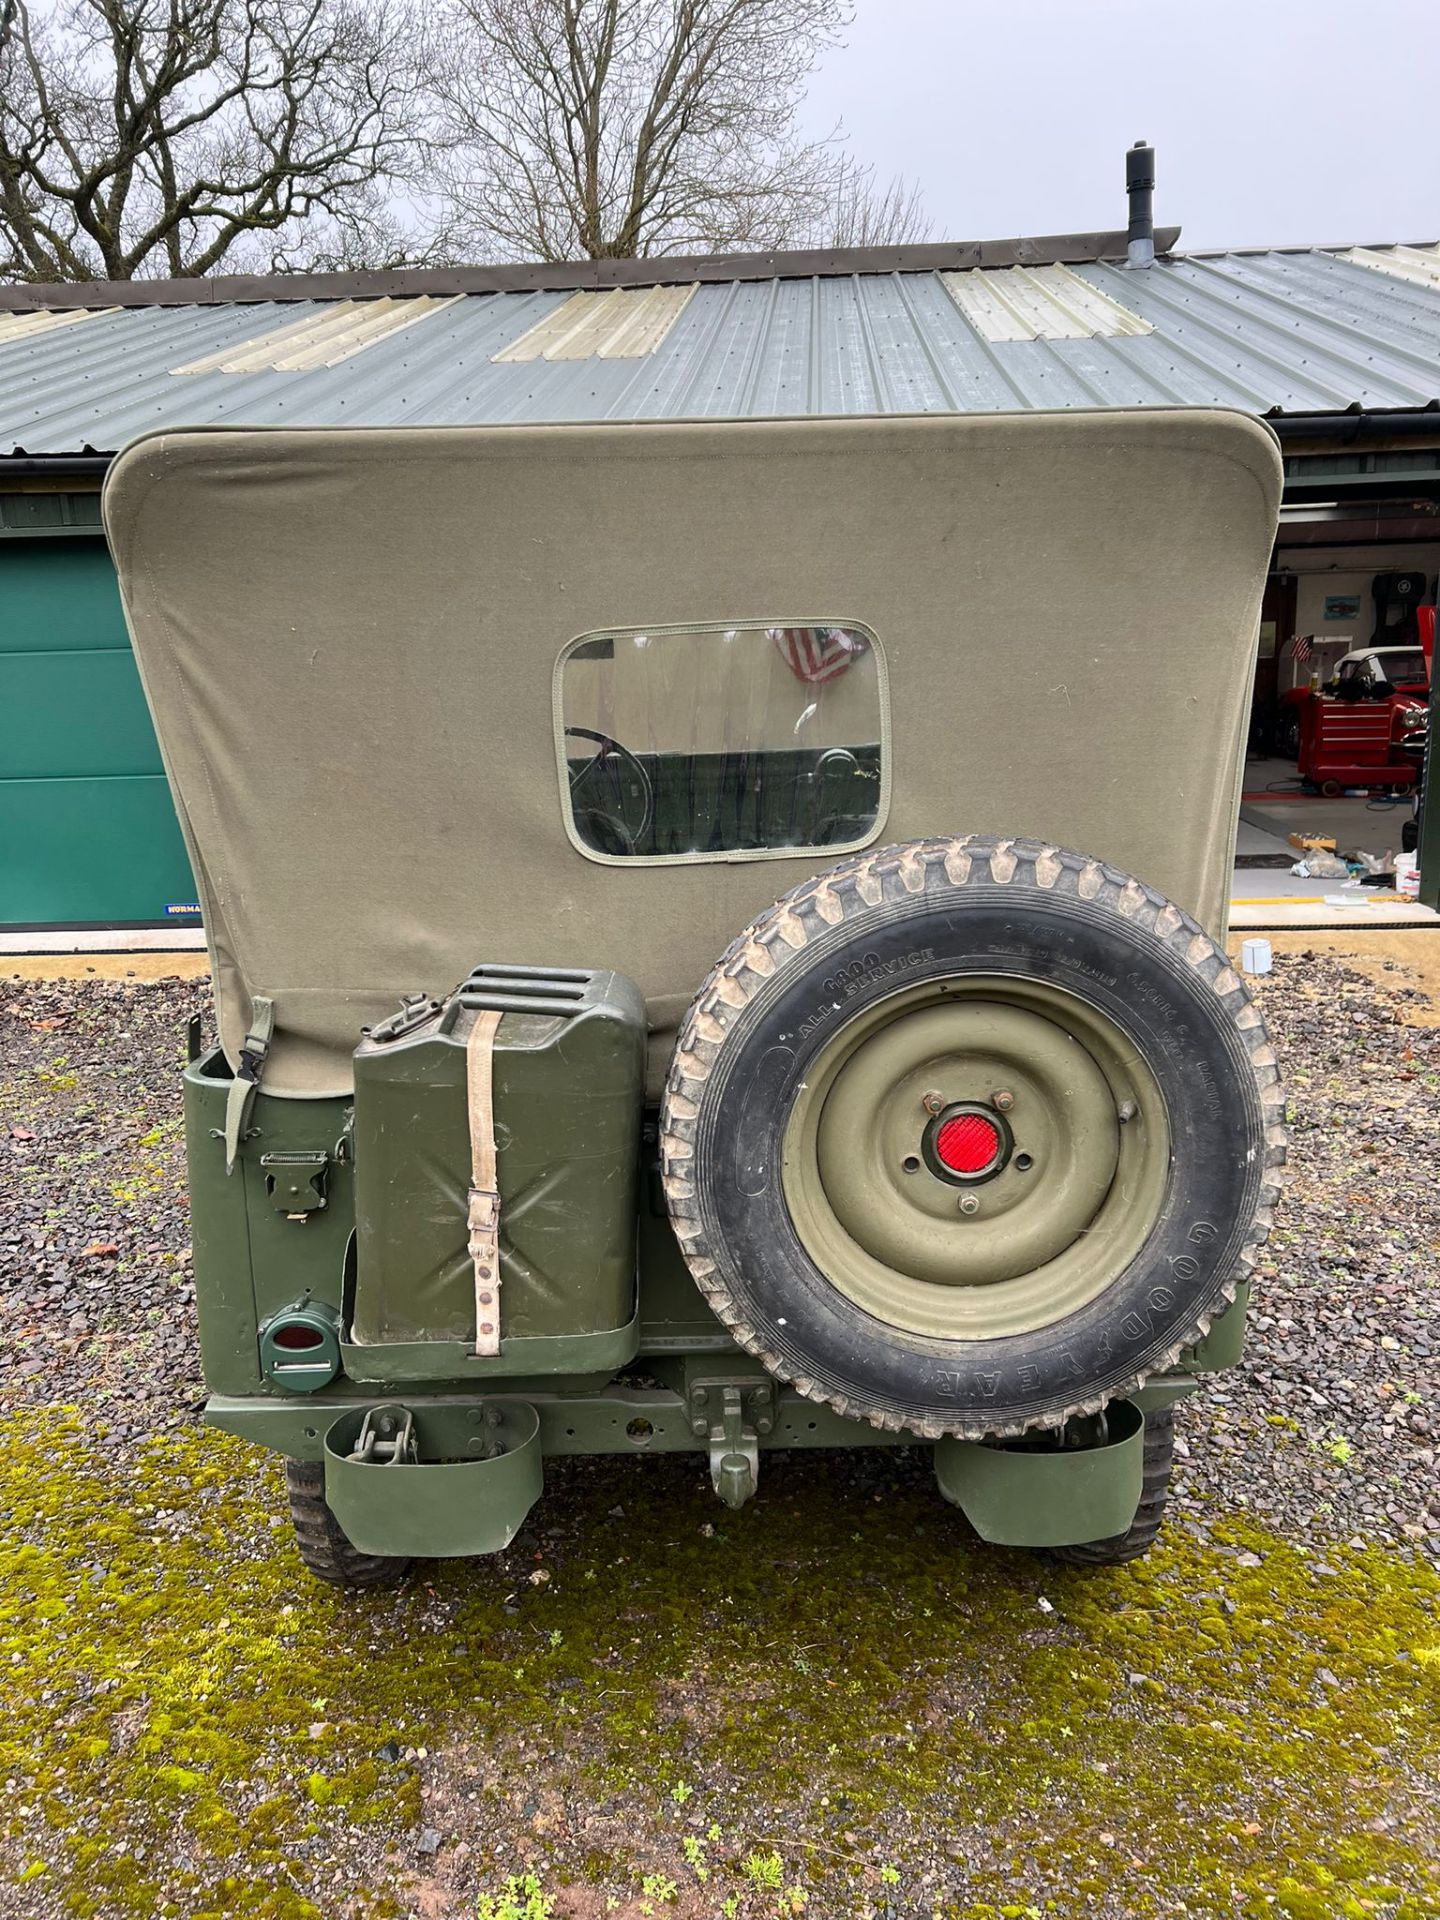 1945 Willys Jeep - Military Vehicle - Restored and raring to go... - Image 8 of 13